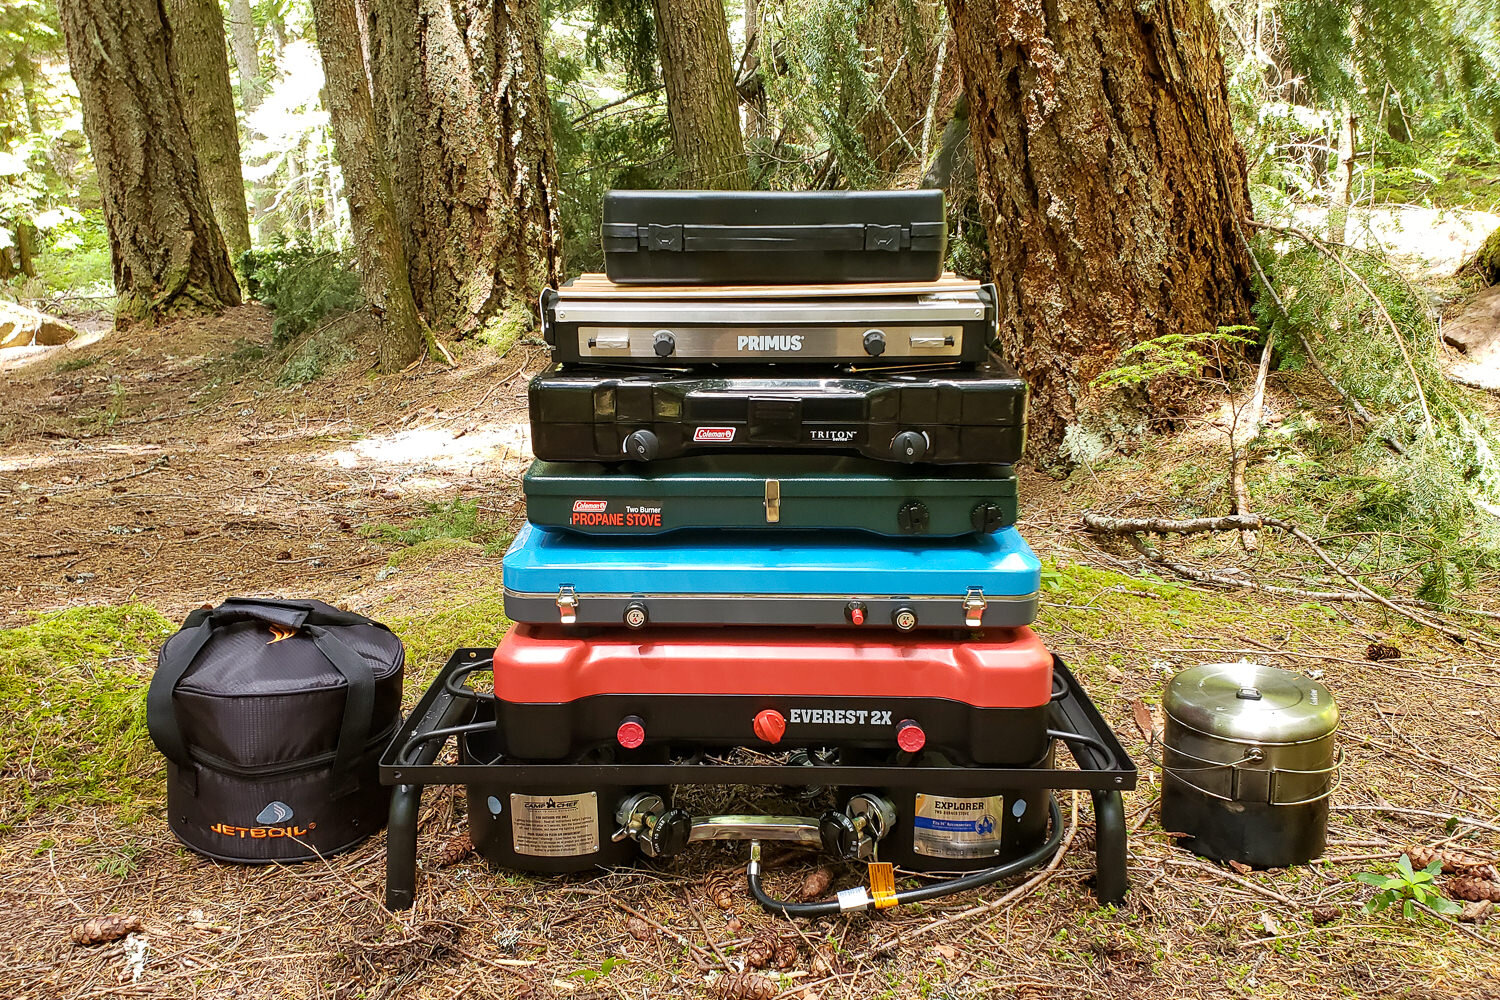 How to Choose a Camp Stove - Backpacking & Car Camping